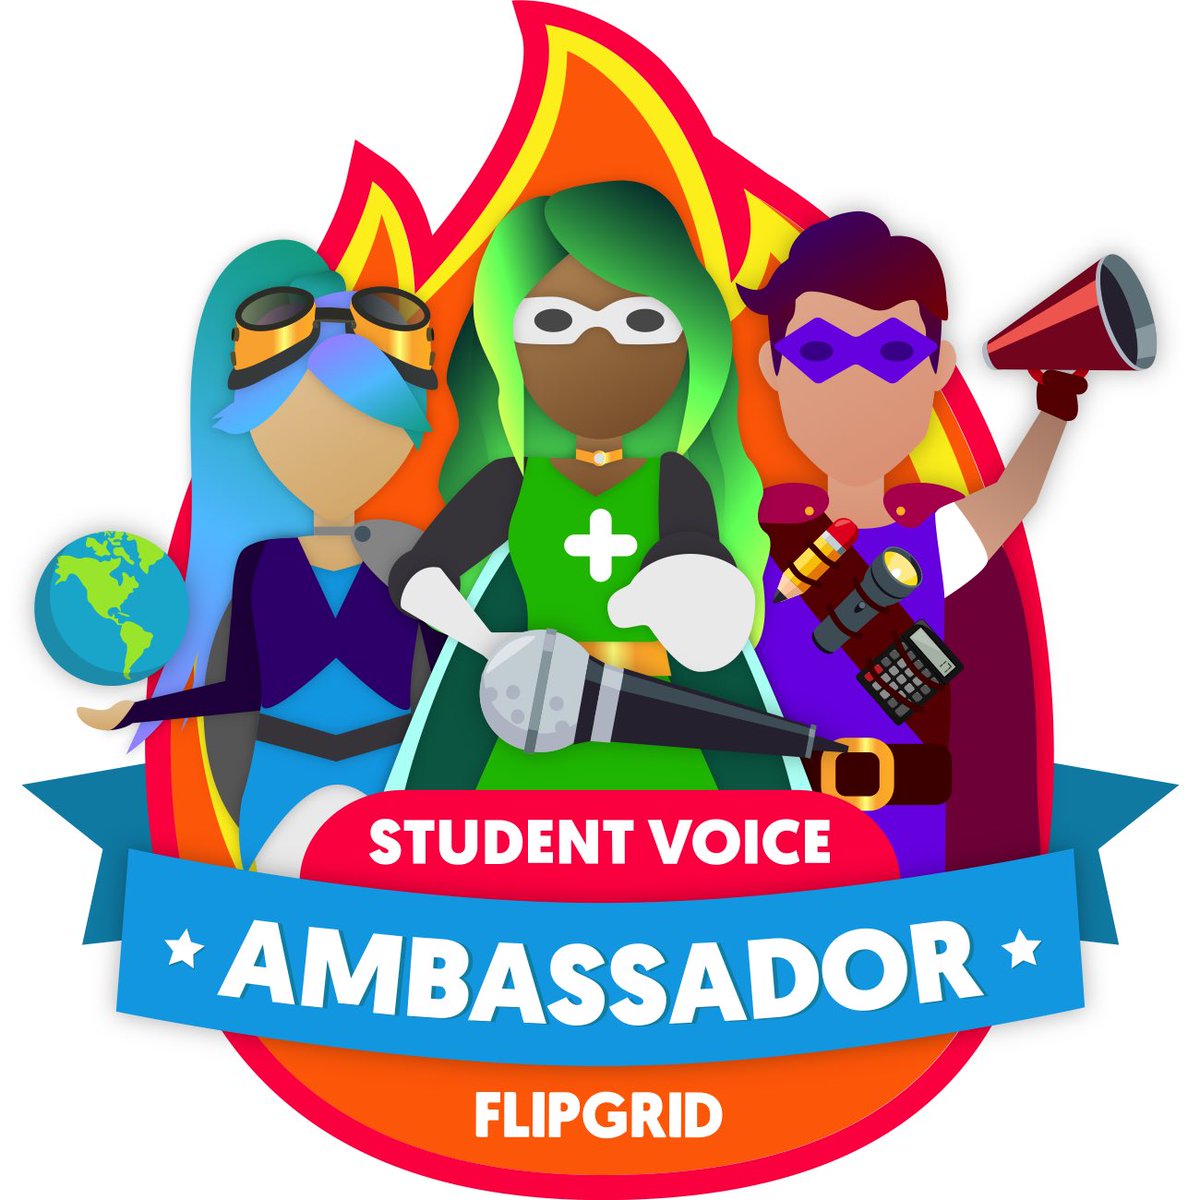 Yay! Found out yesterday that I’m part of the Summer 2019 #StudentVoiceAmbassador team! #usd261derful colleagues.. if you haven’t used @Flipgrid yet and want to (because it’s awesome! 😊), let me know! I’d be happy to introduce you to this amazing tool! #USD261 💚#FlipgridFever💚